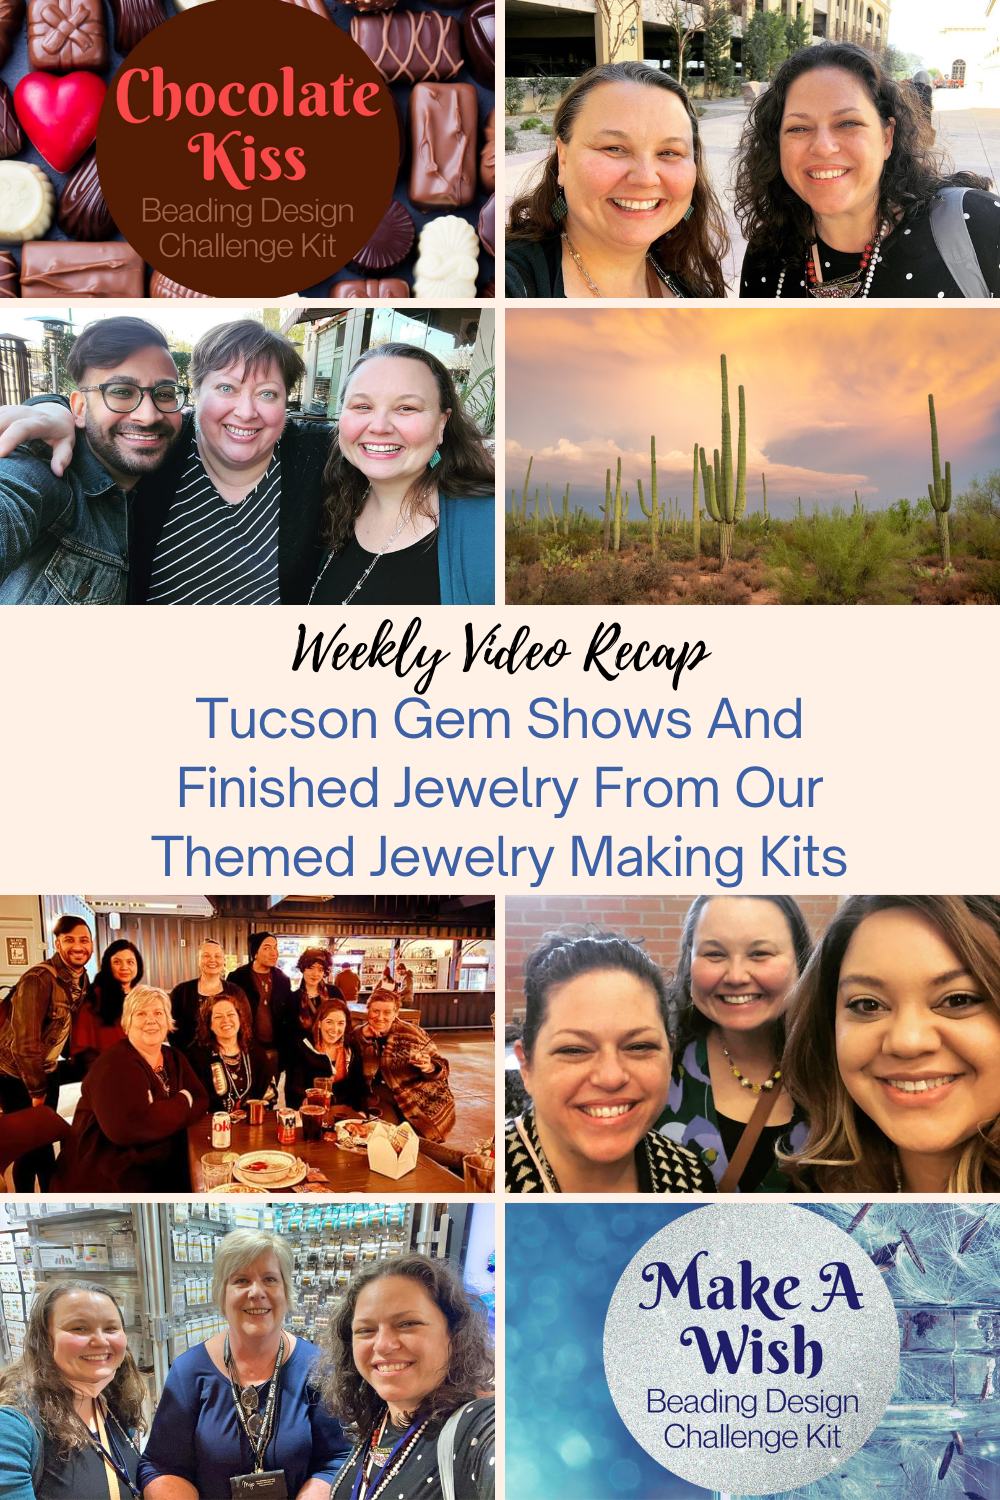 Tucson Gem Shows And Finished Jewelry From Our Themed Jewelry Making Kits Collage